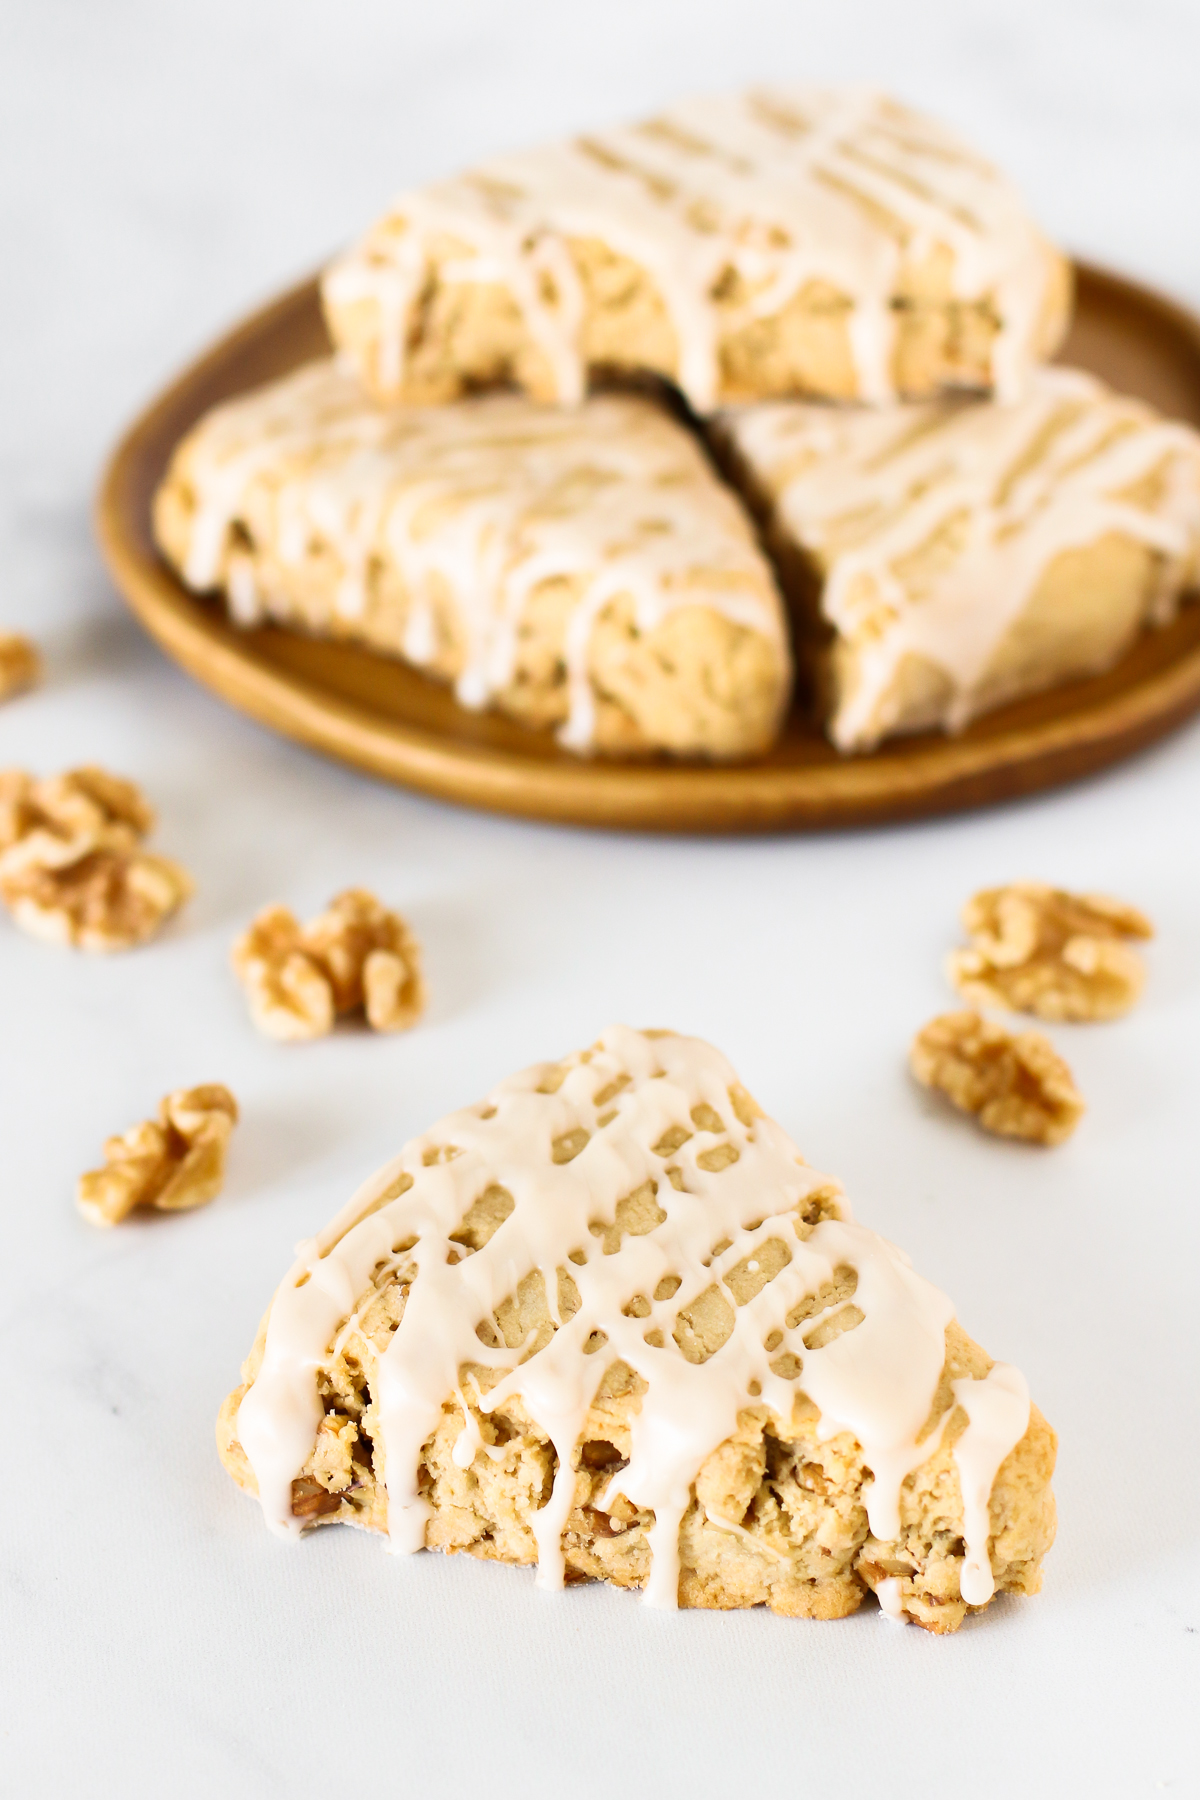 Gluten Free Vegan Maple Walnut Scones. Tender scones with toasted walnuts, covered in a delicious maple glaze.